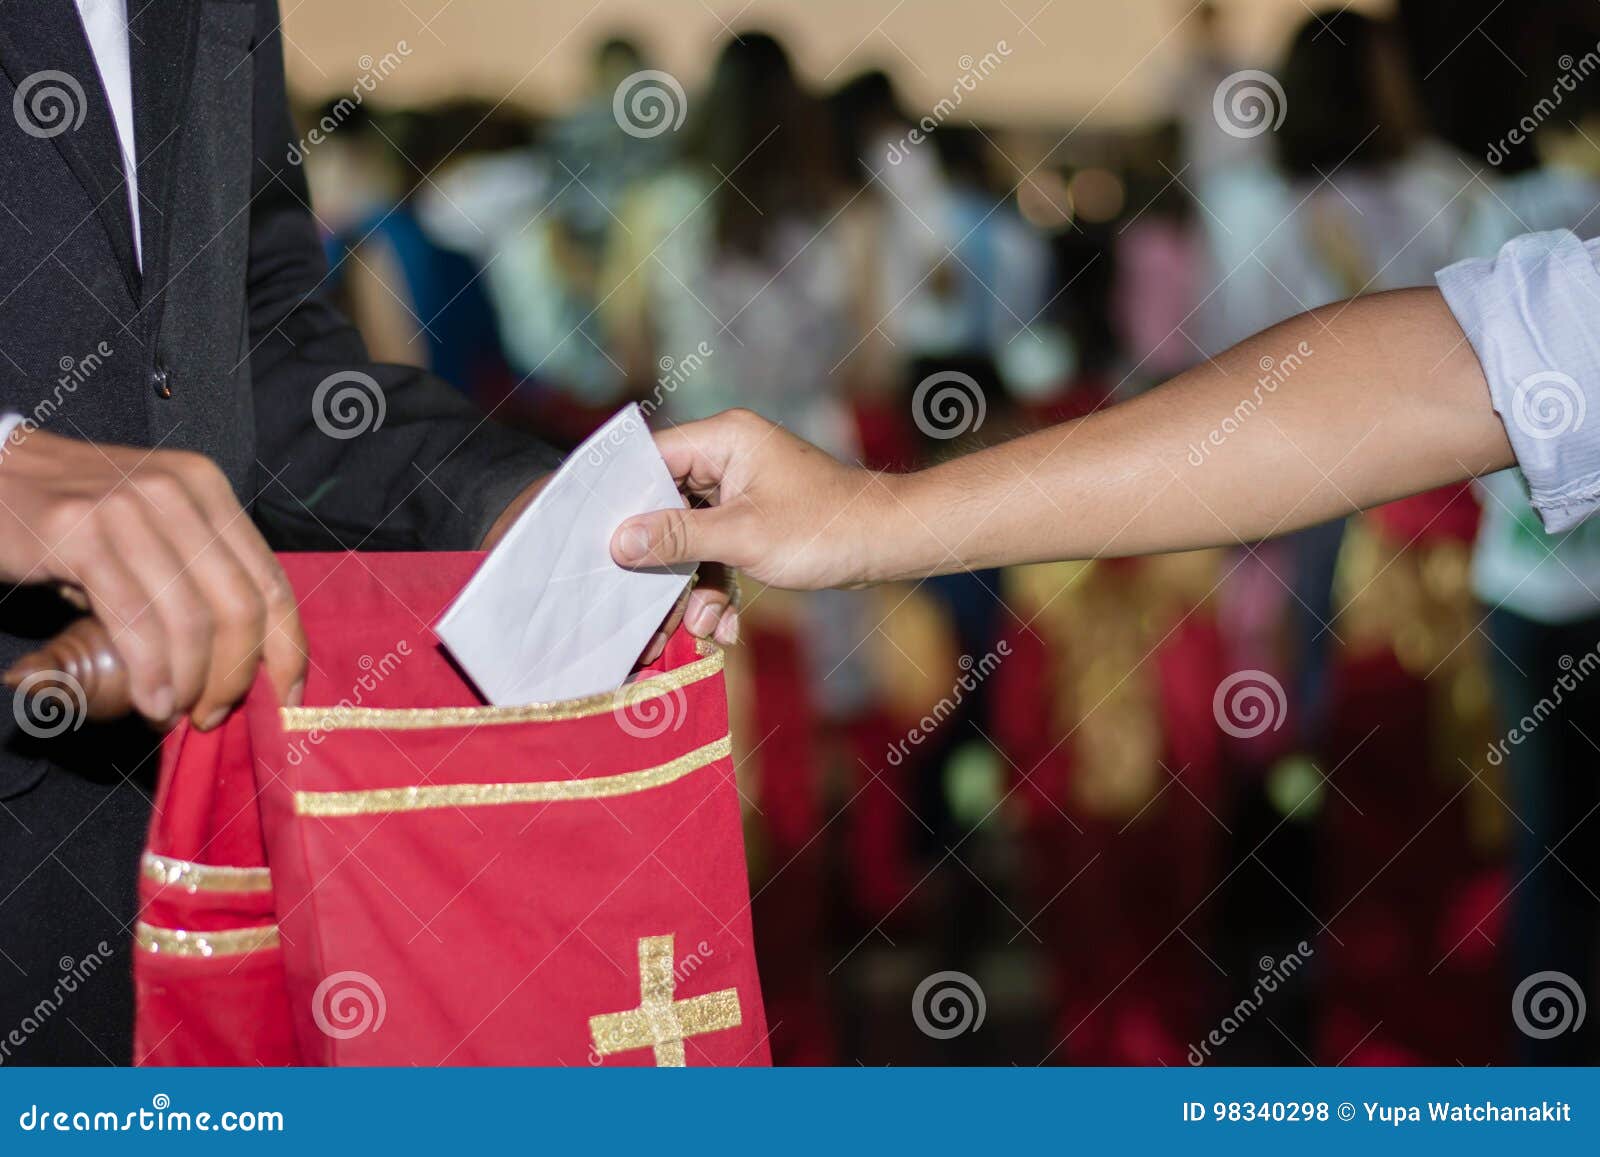 people putting tithing into velvet offering bag in church